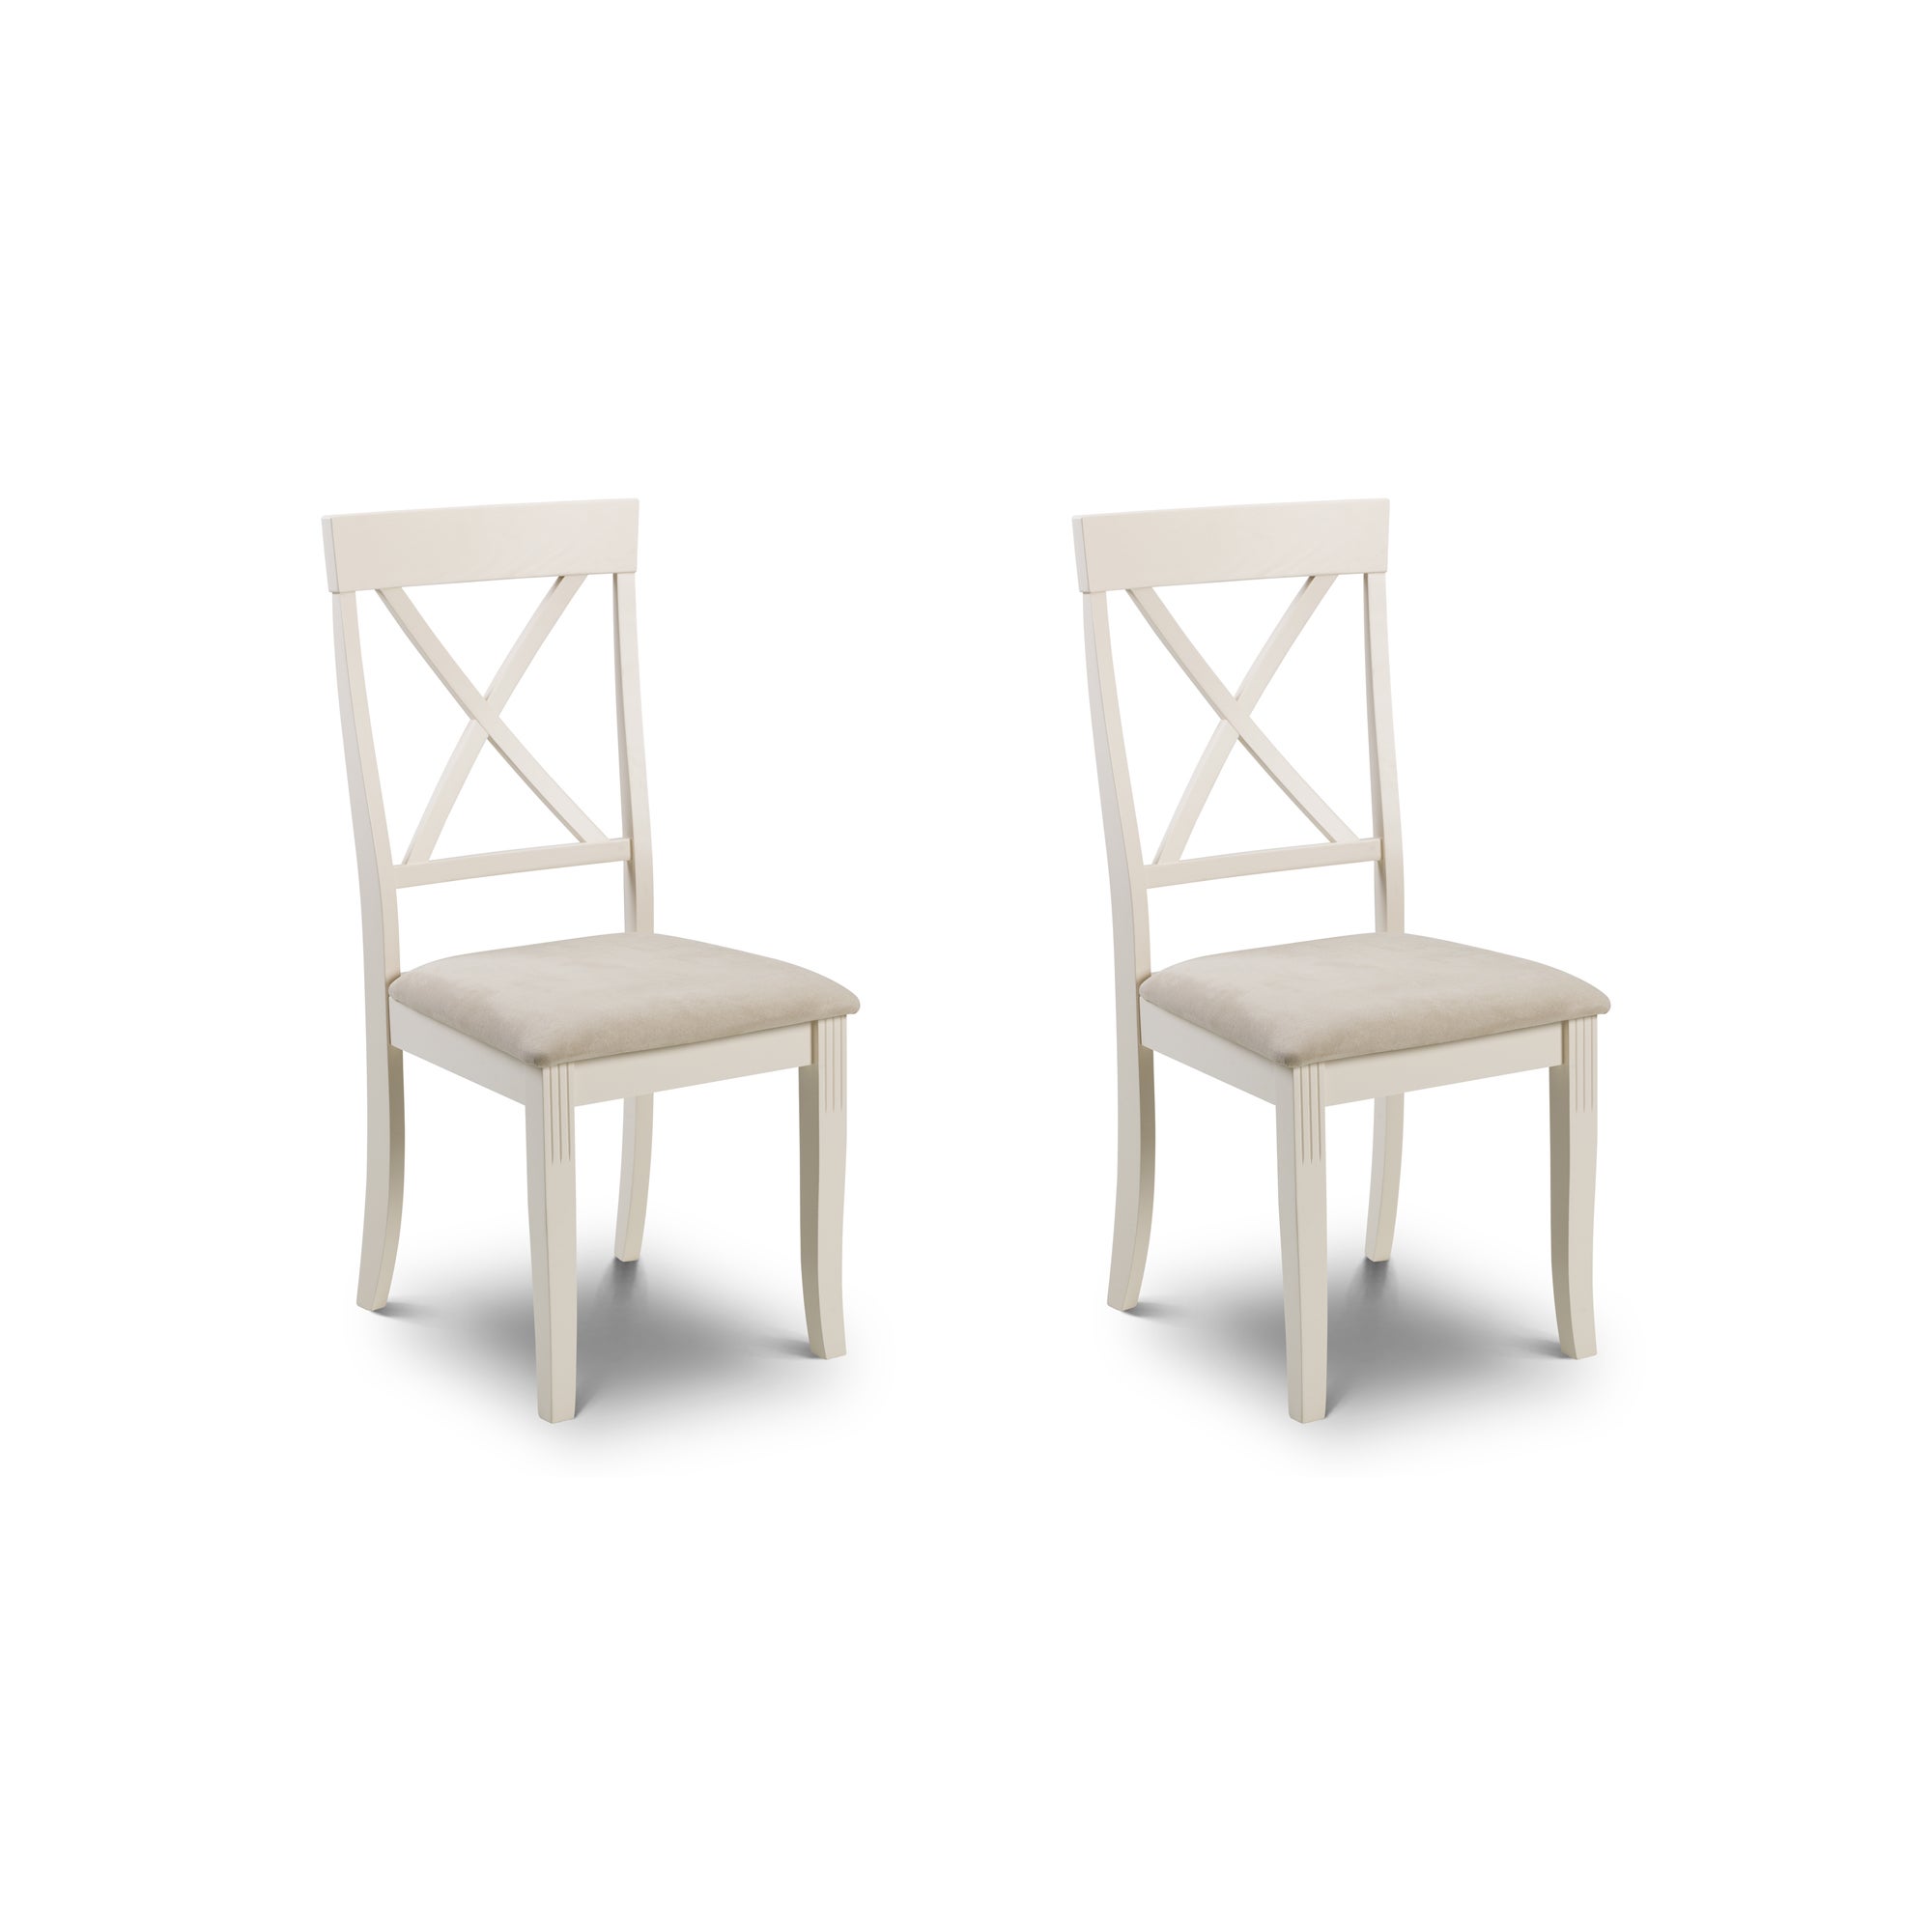 Davenport Set Of 2 Dining Chairs Faux Leather Cream